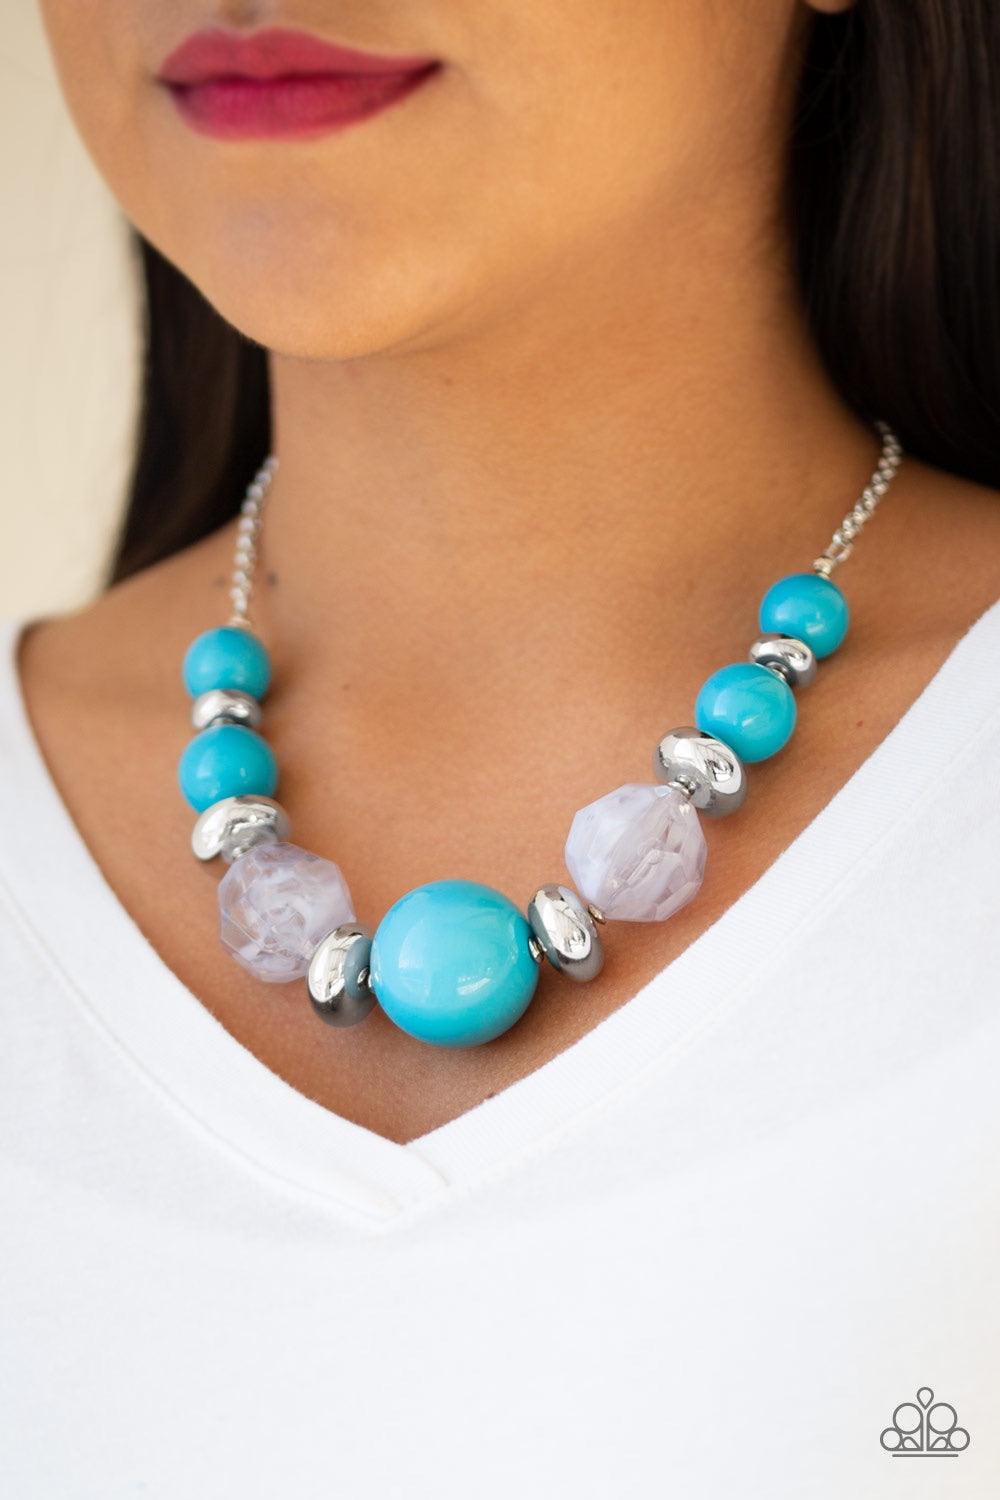 Paparazzi Accessories Daytime Drama - Blue Gradually increasing in size near the center, a collection of blue, silver, and cloudy beads join below the collar in a statement making fashion. Features an adjustable clasp closure. Jewelry